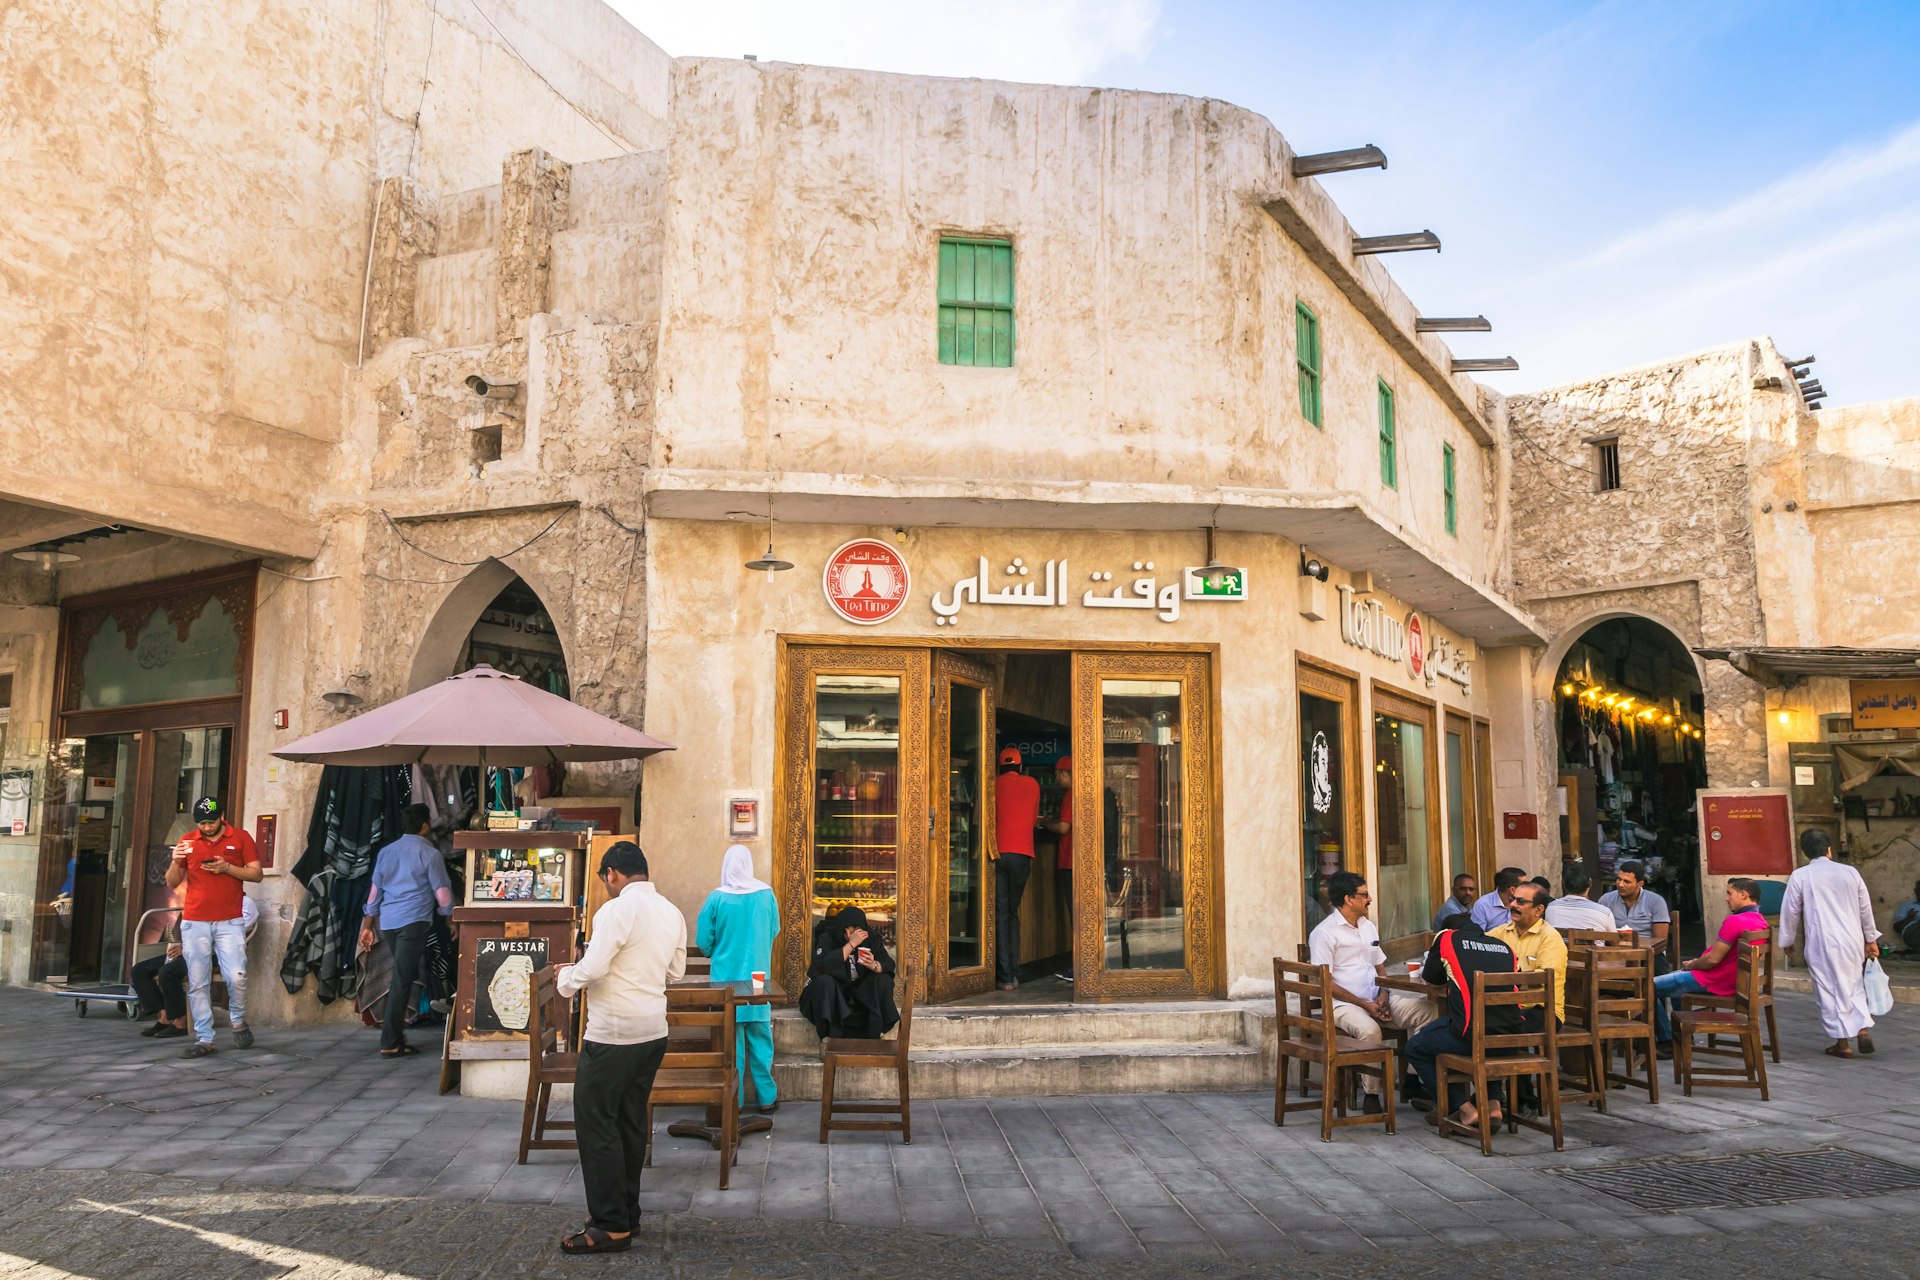 People sitting and relaxing in coffee shop at Souq Waqif street.